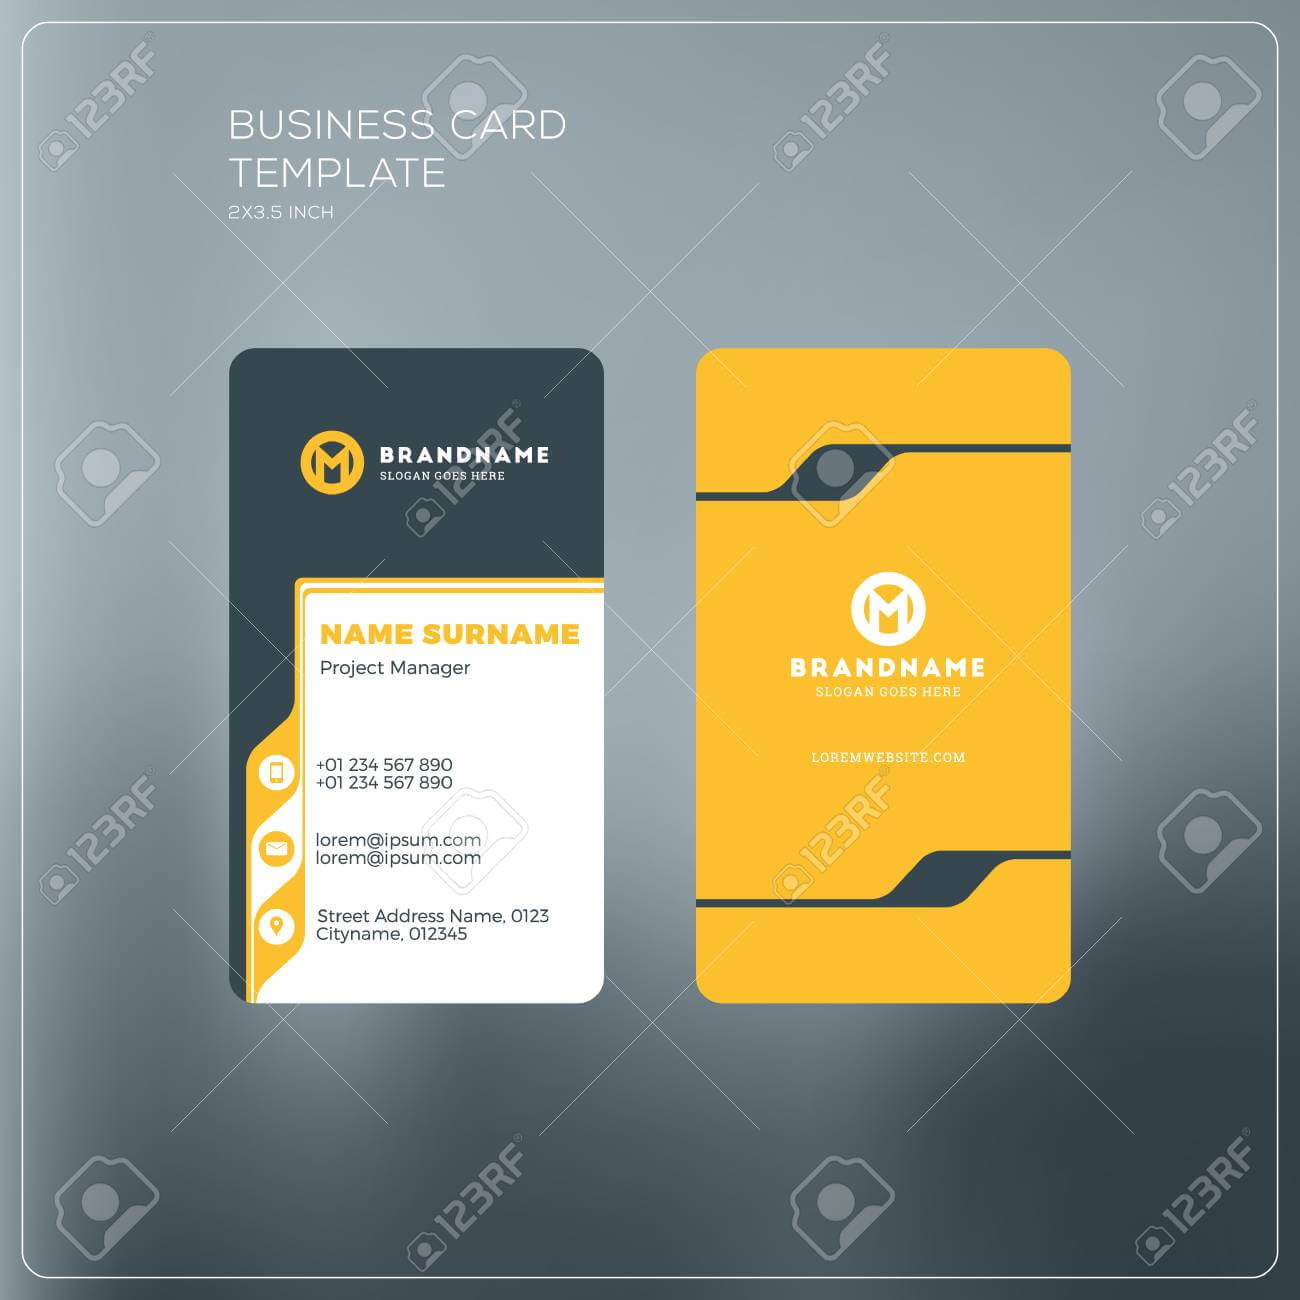 Personal Business Cards Template Regarding Business Cards For Teachers Templates Free